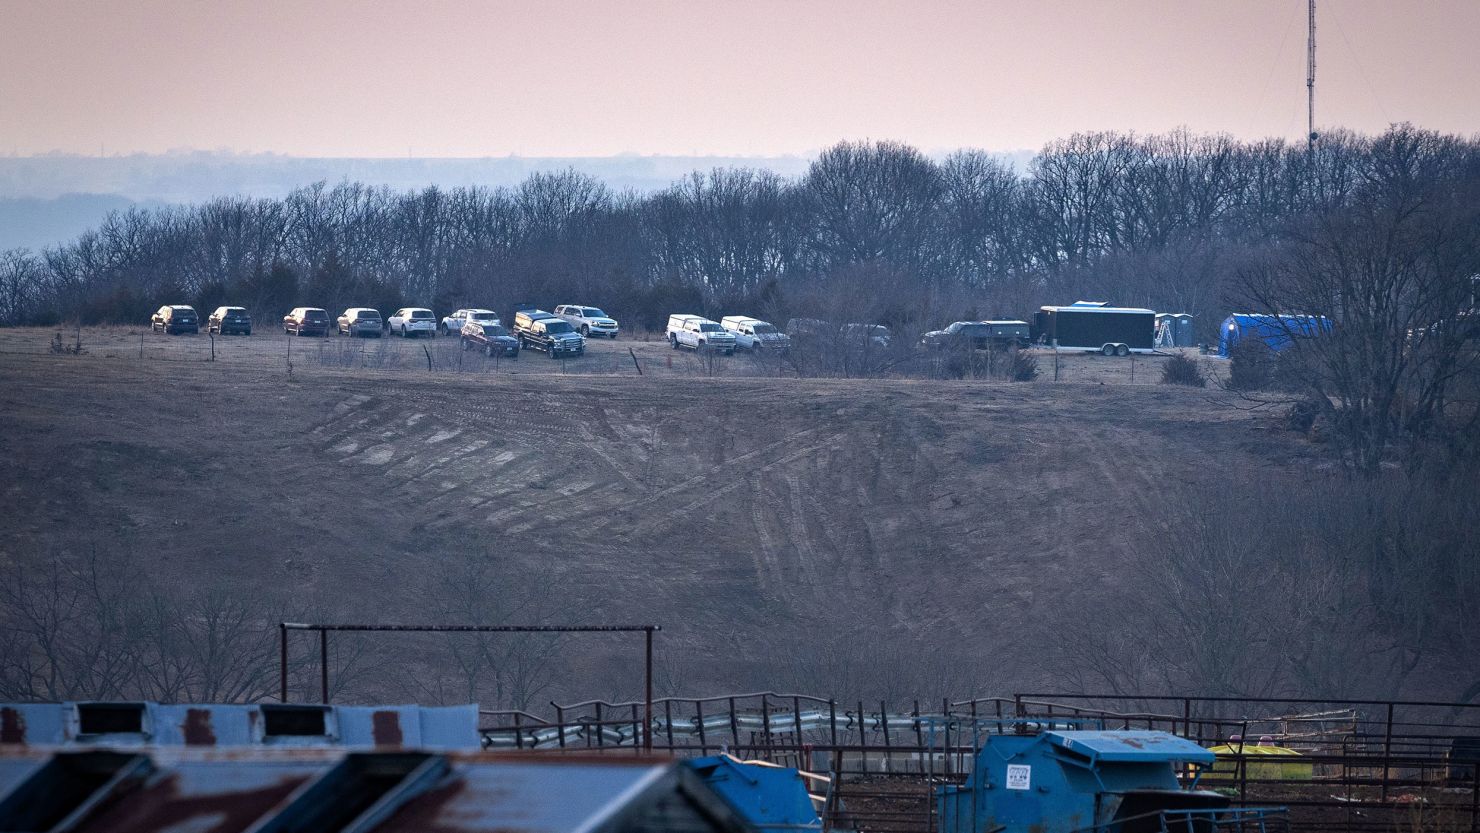 A line of vehicles parked near the rural Iowa site where authorities were searching for human remains said to have been buried there by a serial killer. They said they found nothing of concern there.